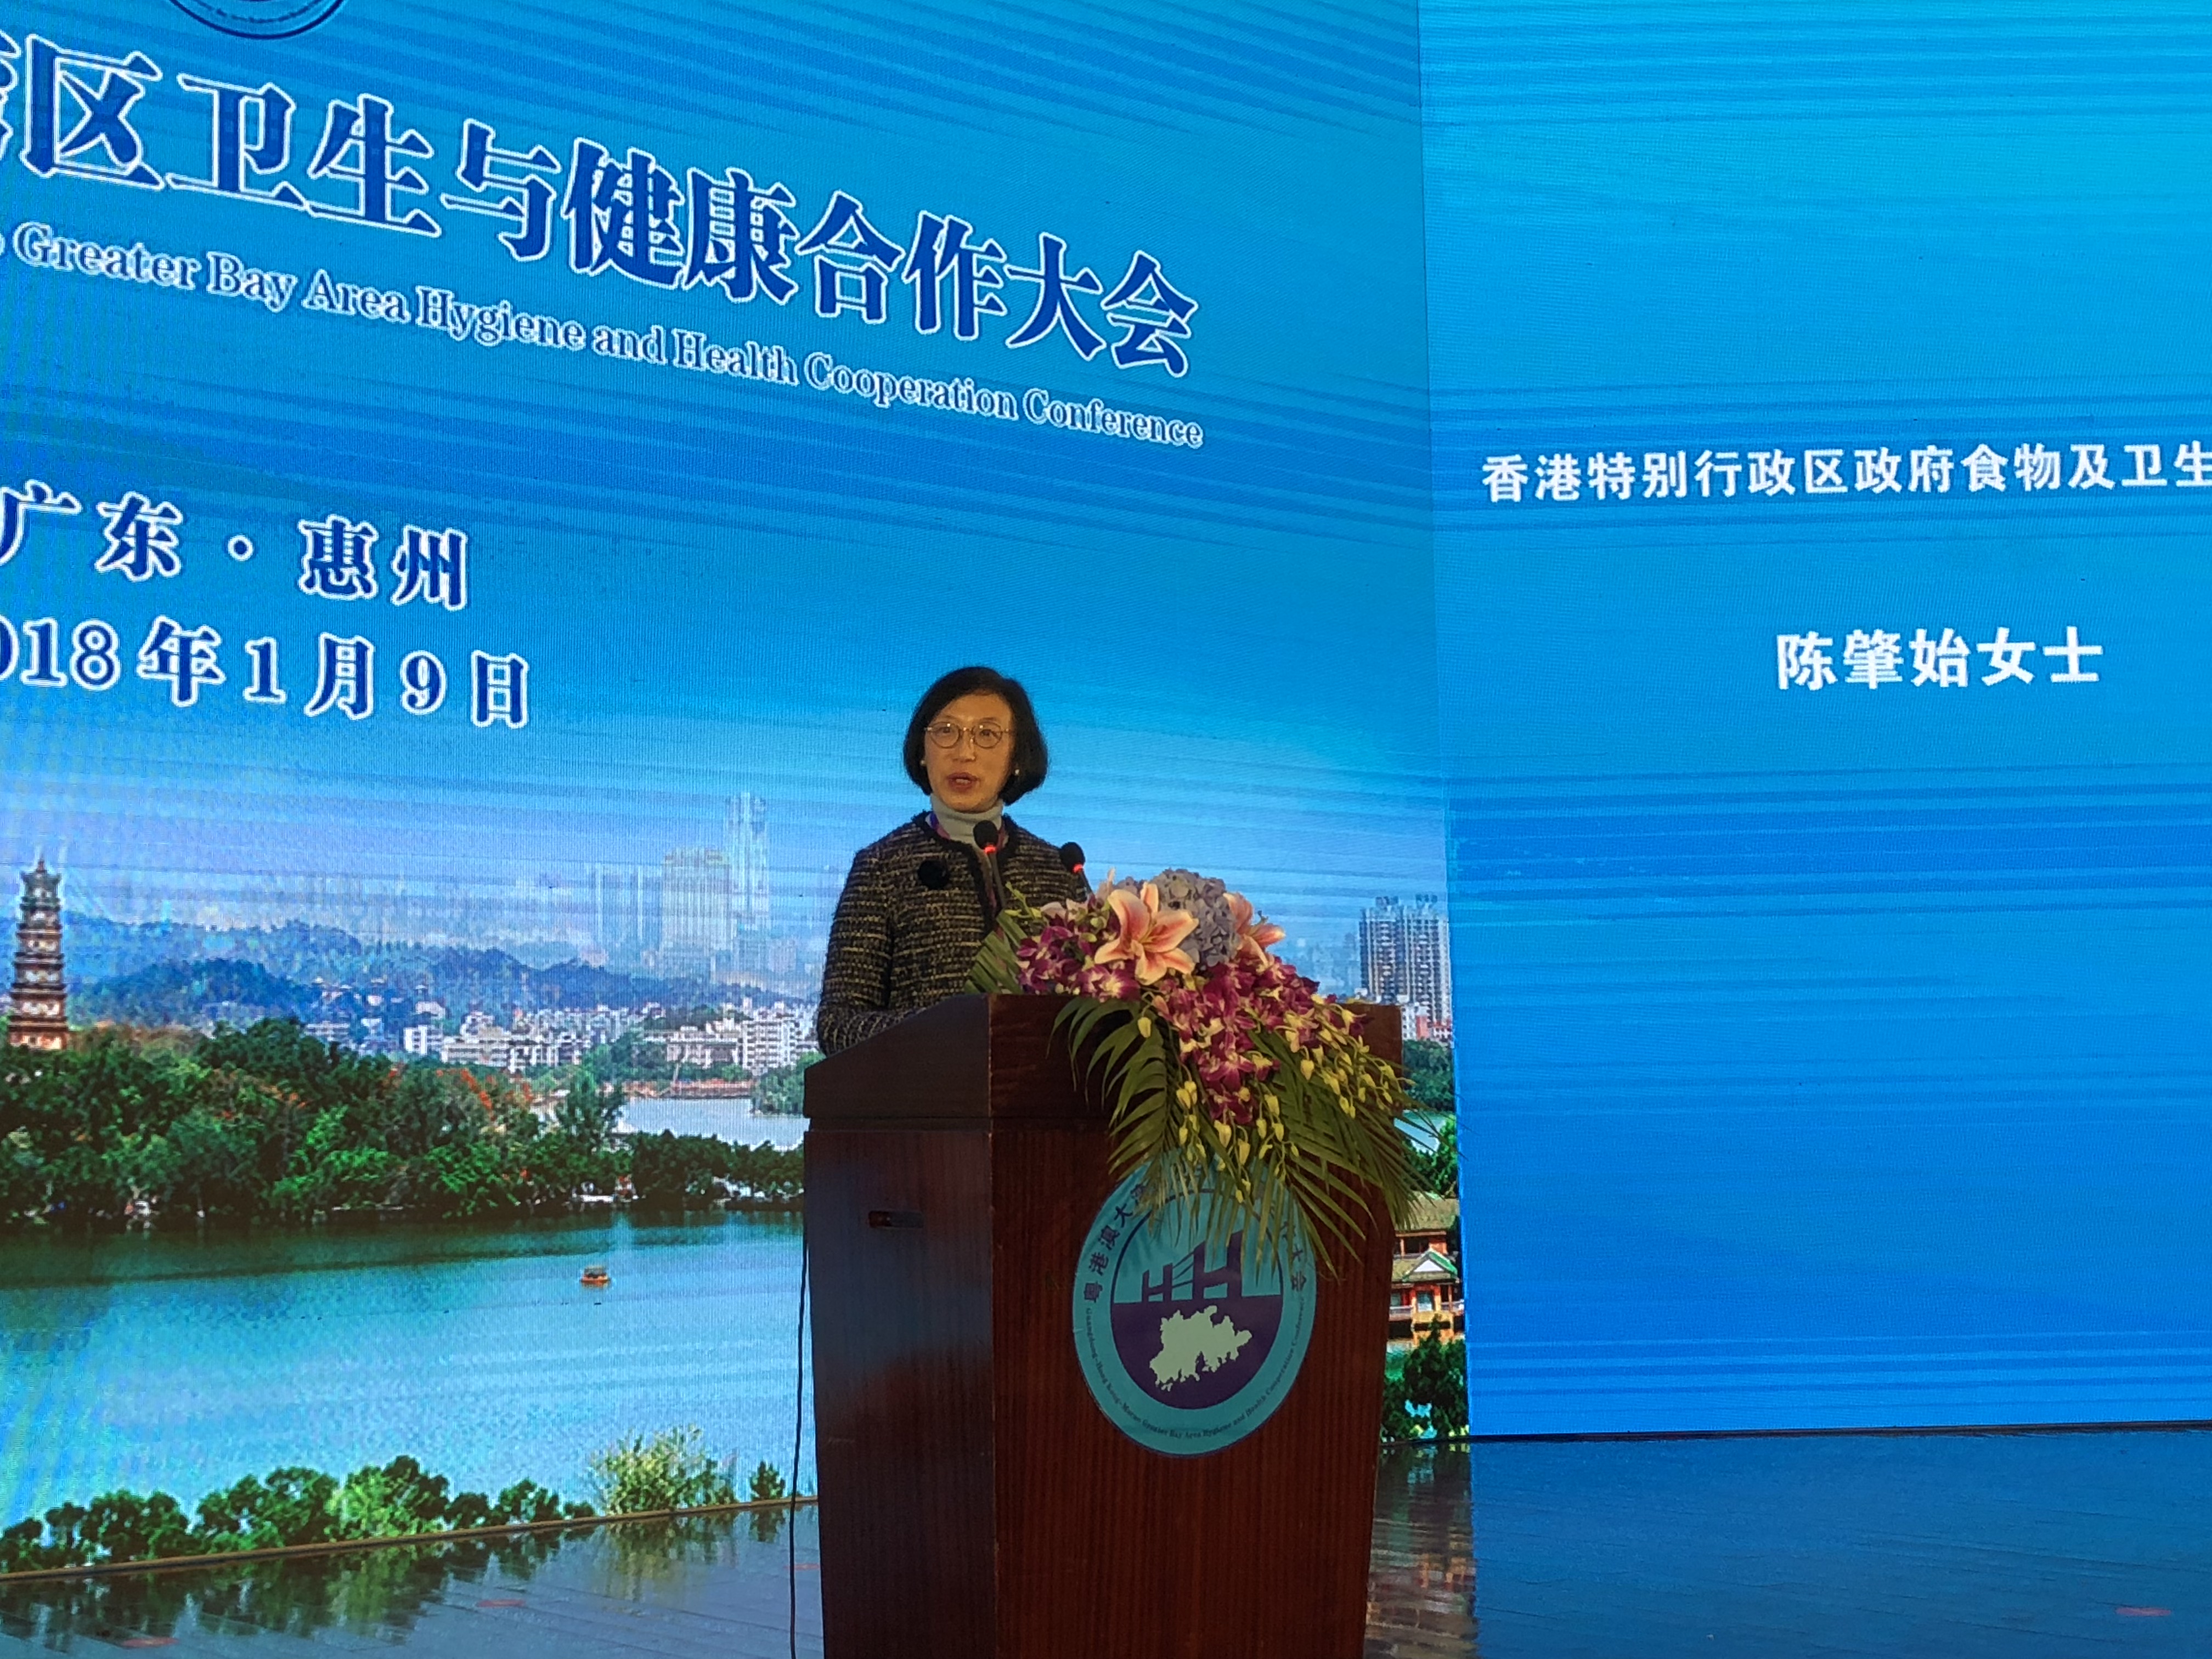 The Secretary for Food and Health, Professor Sophia Chan, led a delegation to Huizhou to attend the first Guangdong-Hong Kong-Macao Hygiene and Health Cooperation Conference today (January 9) to promote closer ties with the Mainland and Macao health authorities. The conference was co-organised by the Health and Family Planning Commission of Guangdong Province, the Food and Health Bureau, and the Health Bureau of the Macao Special Administrative Region Government. Photo shows Professor Chan delivering a speech at the opening ceremony.